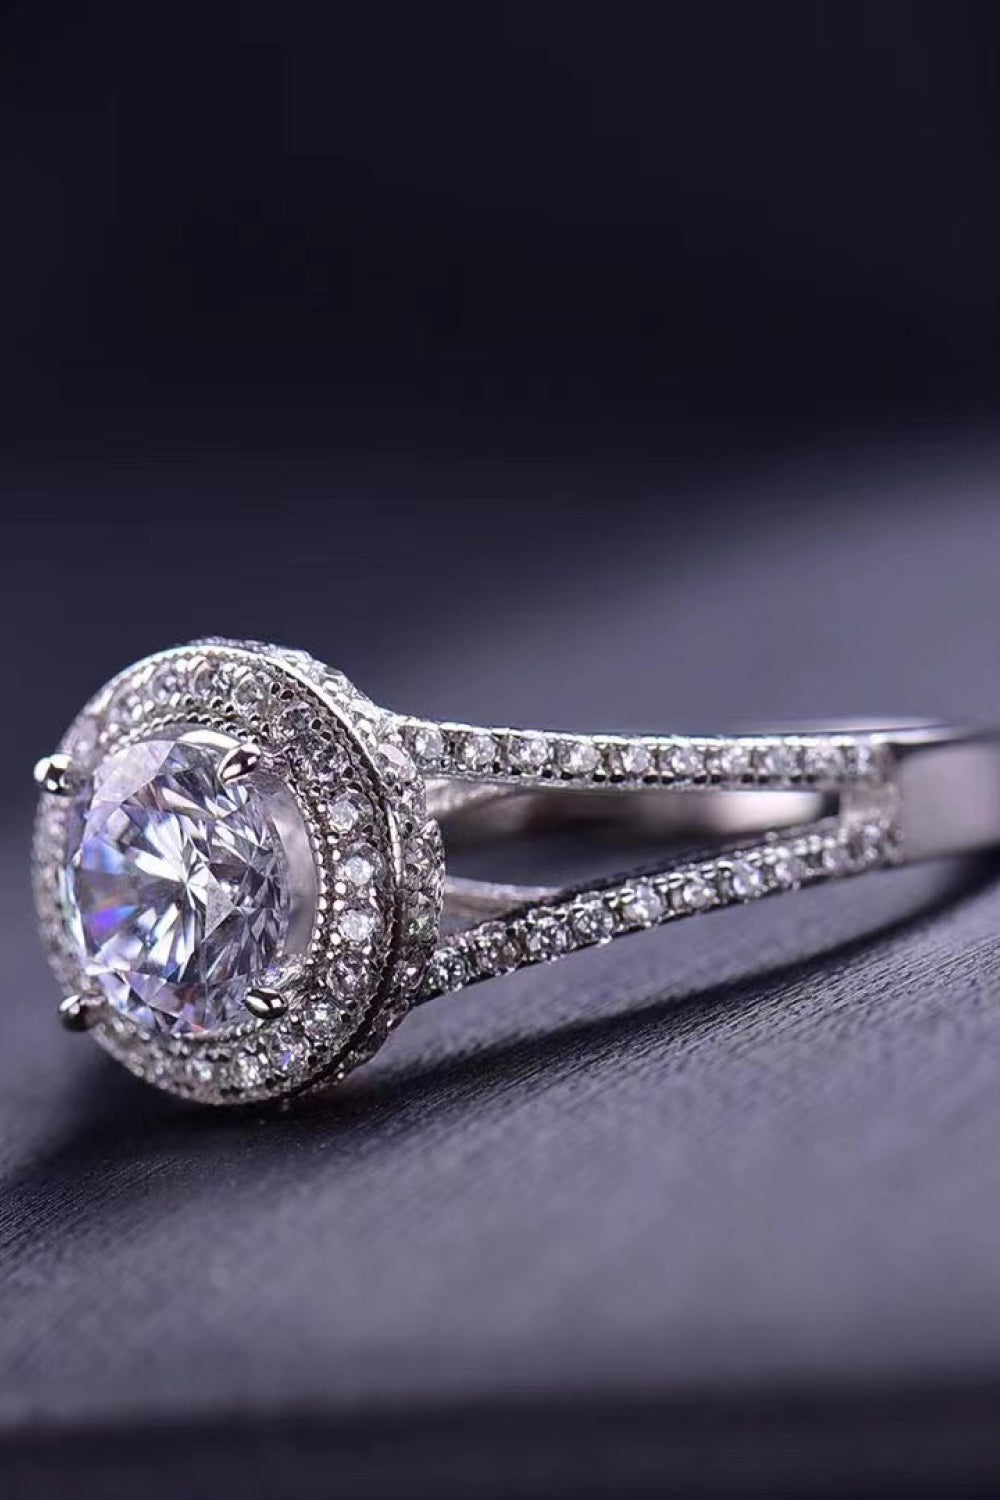 Shiny and Chic 2 Carat Moissanite Ring